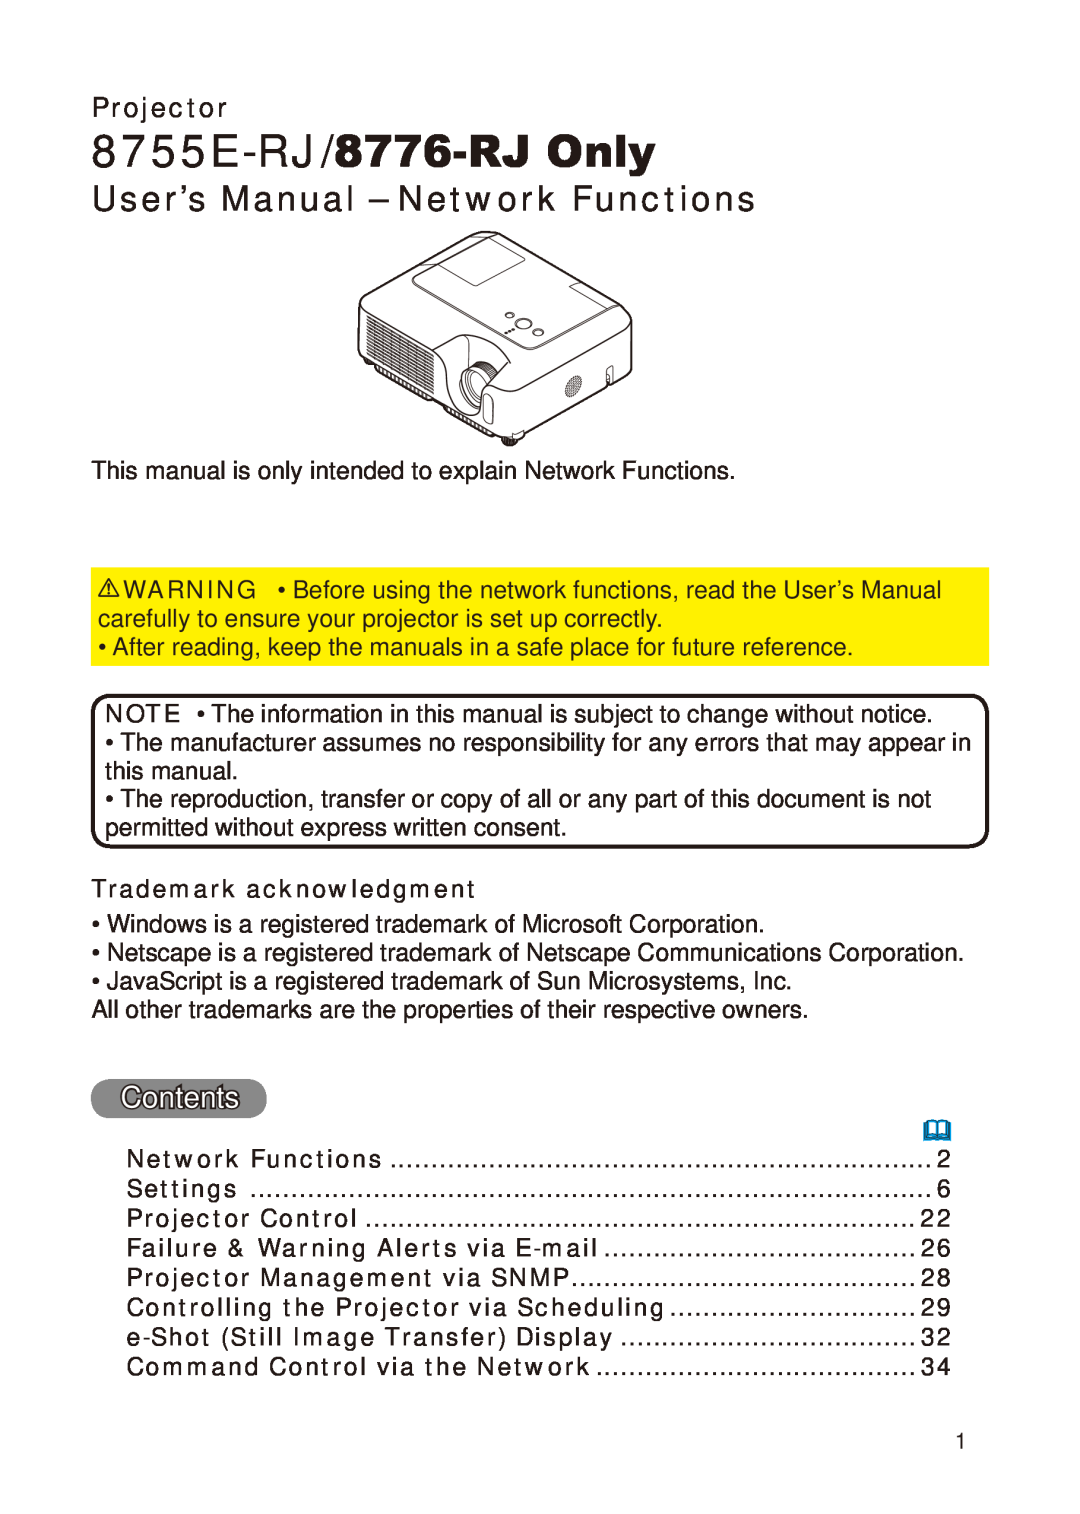 Dukane 8755E-RJ/8776-RJ Only, User’s Manual - Network Functions, Contents, Trademark acknowledgment, Projector 